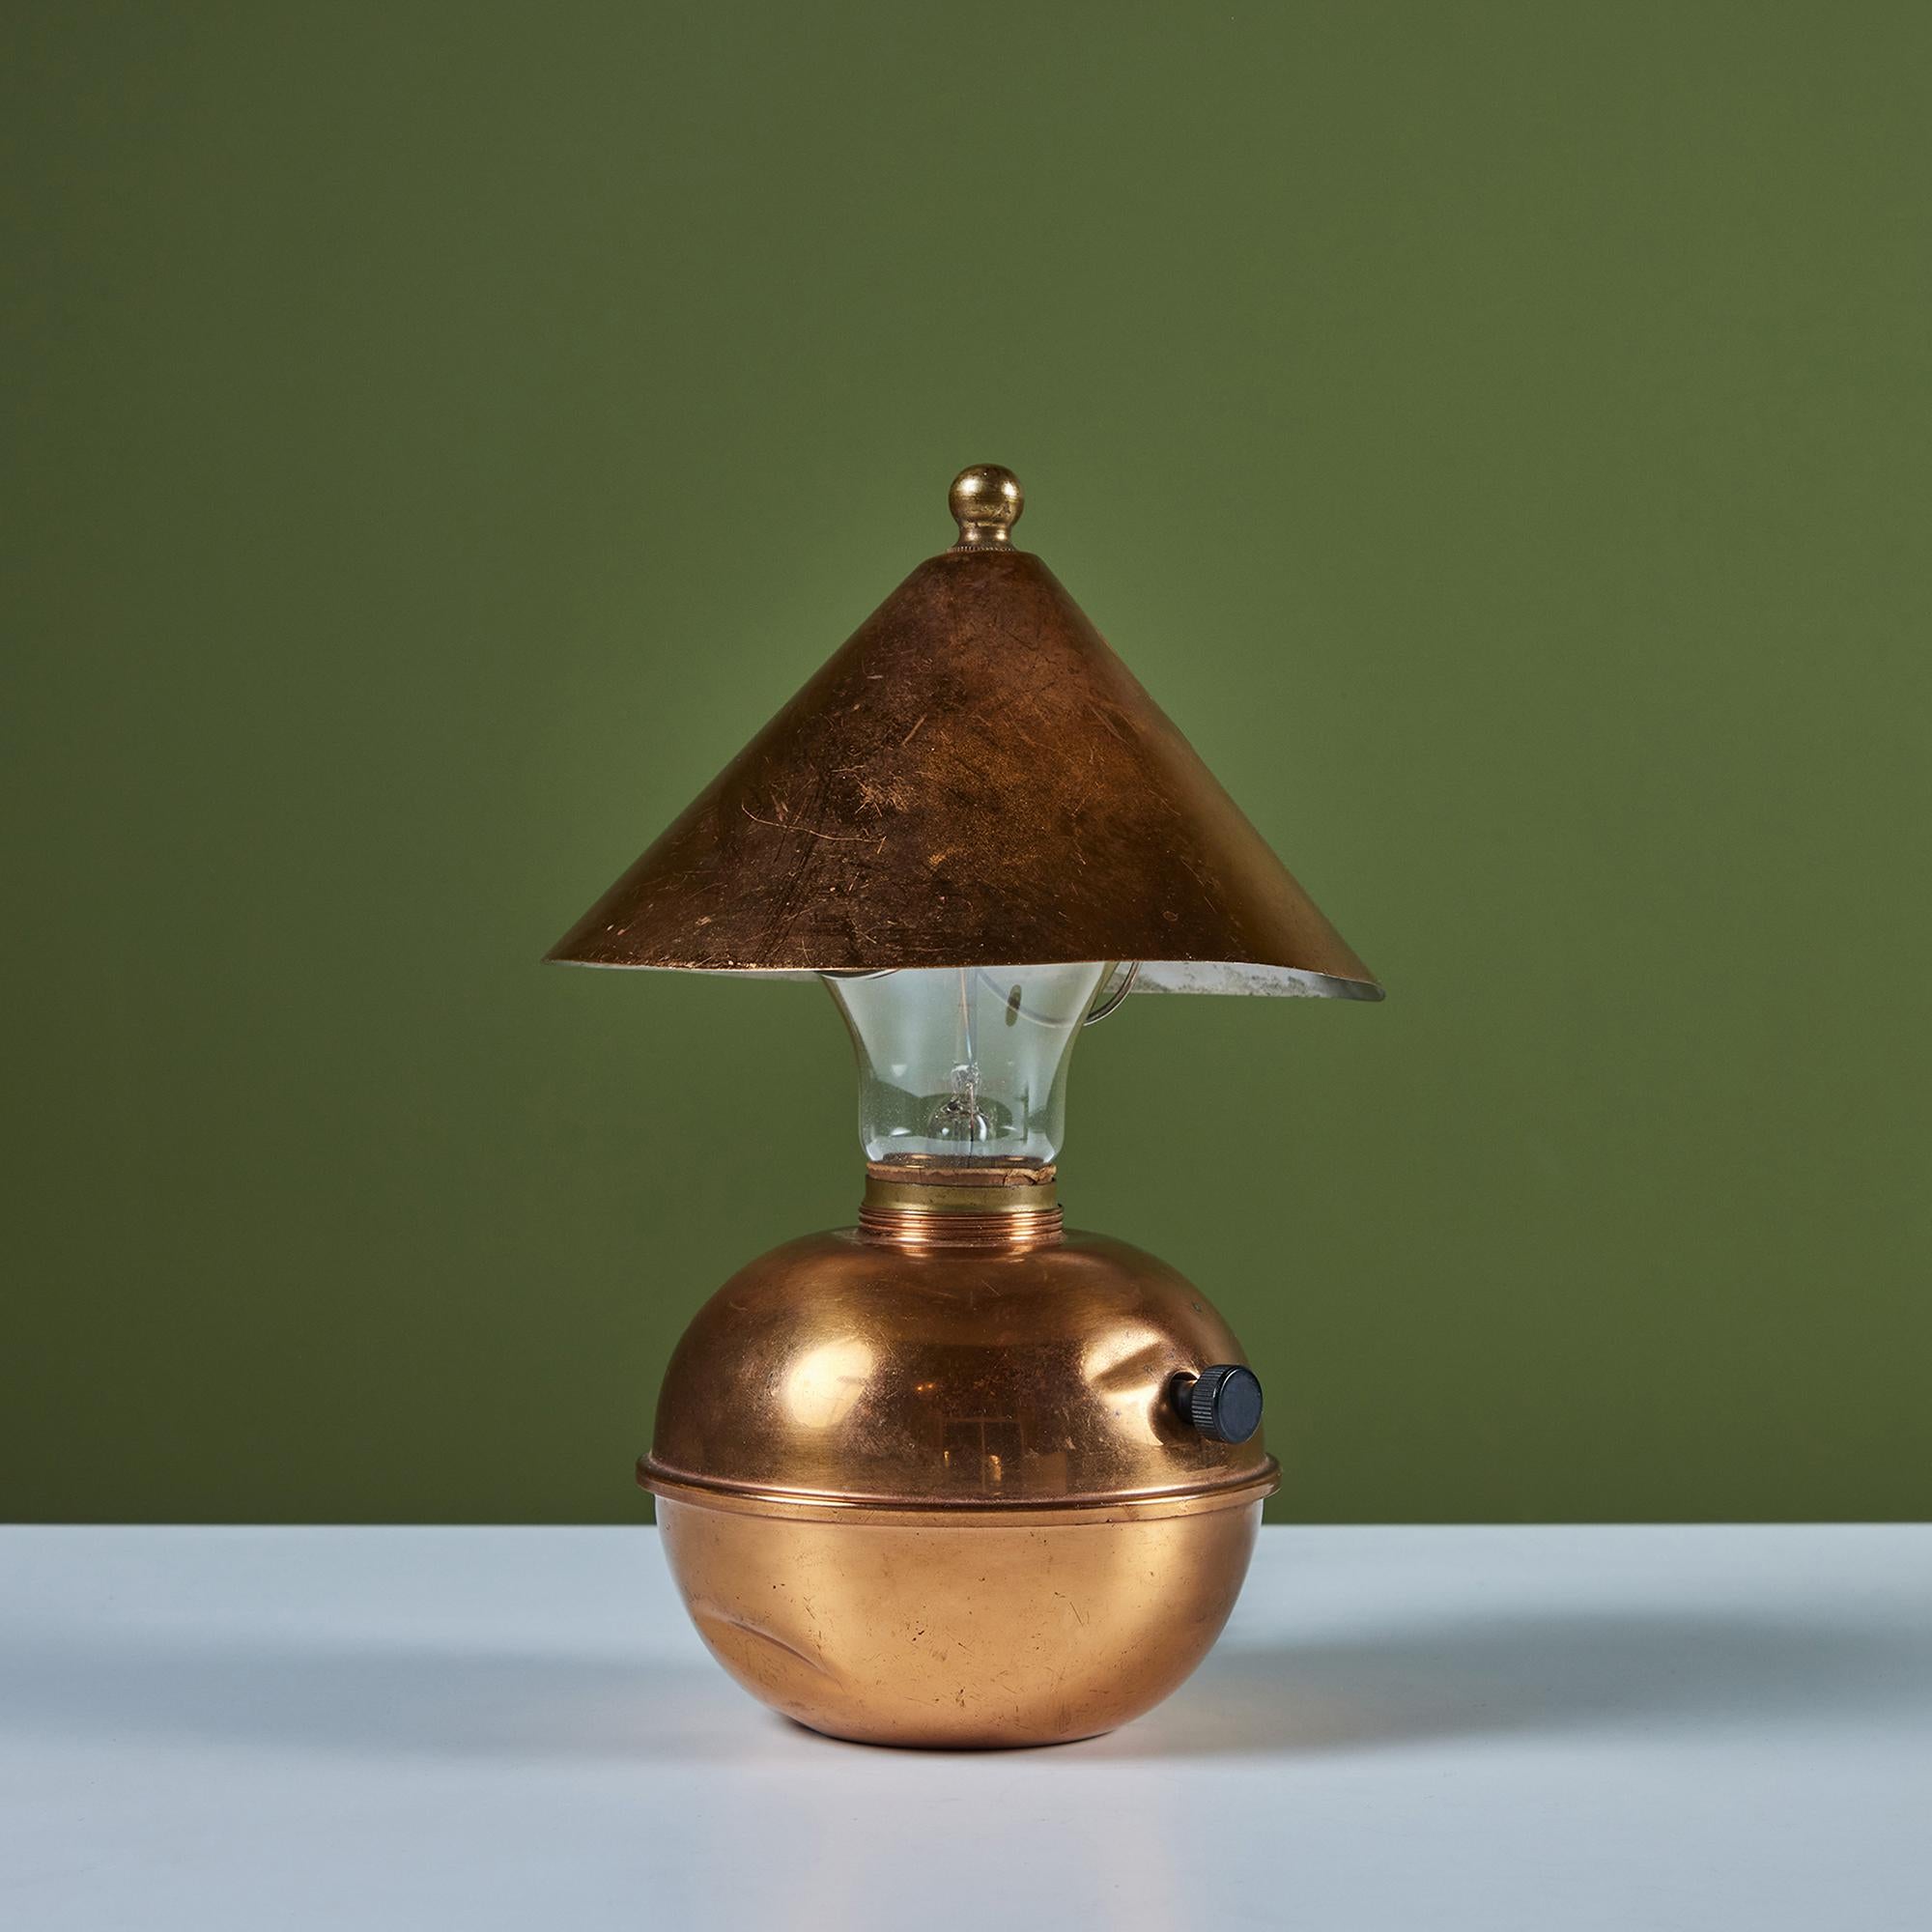 Petite copper table lamp by Ruth Gerth for Chase, c.1930s, USA. The Art Deco lamp features a cone shaped shade and bulb body in patinated copper. The minimalist design is playful and a fun piece to add to a shelf or desk.  Impressed with [Chase] and